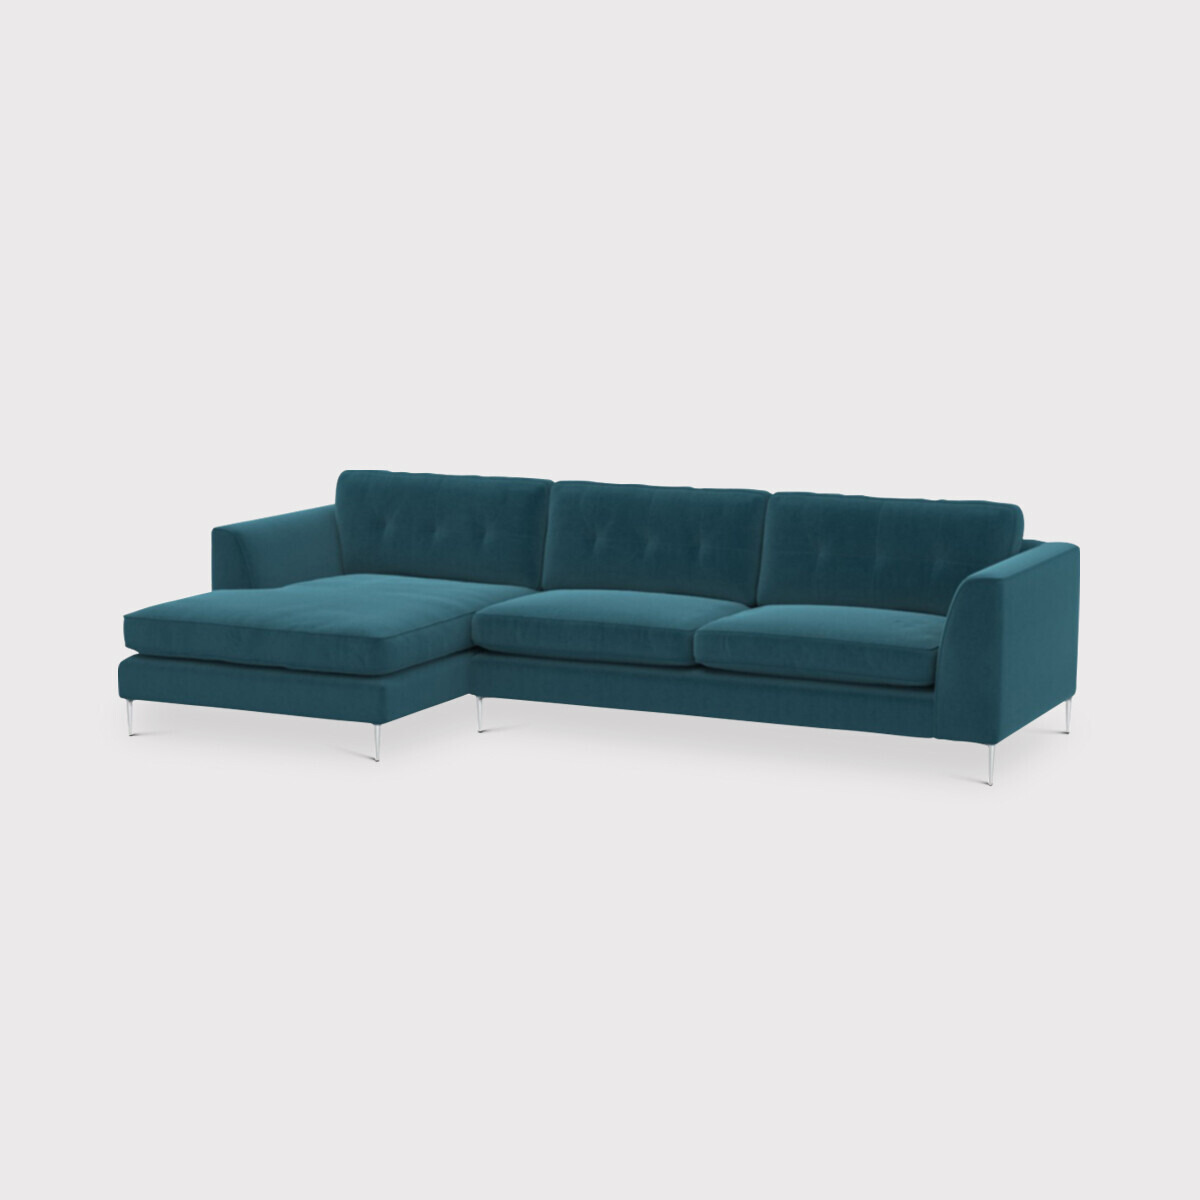 Conza Large Chaise Corner Sofa Left, Teal Fabric - Barker & Stonehouse - image 1